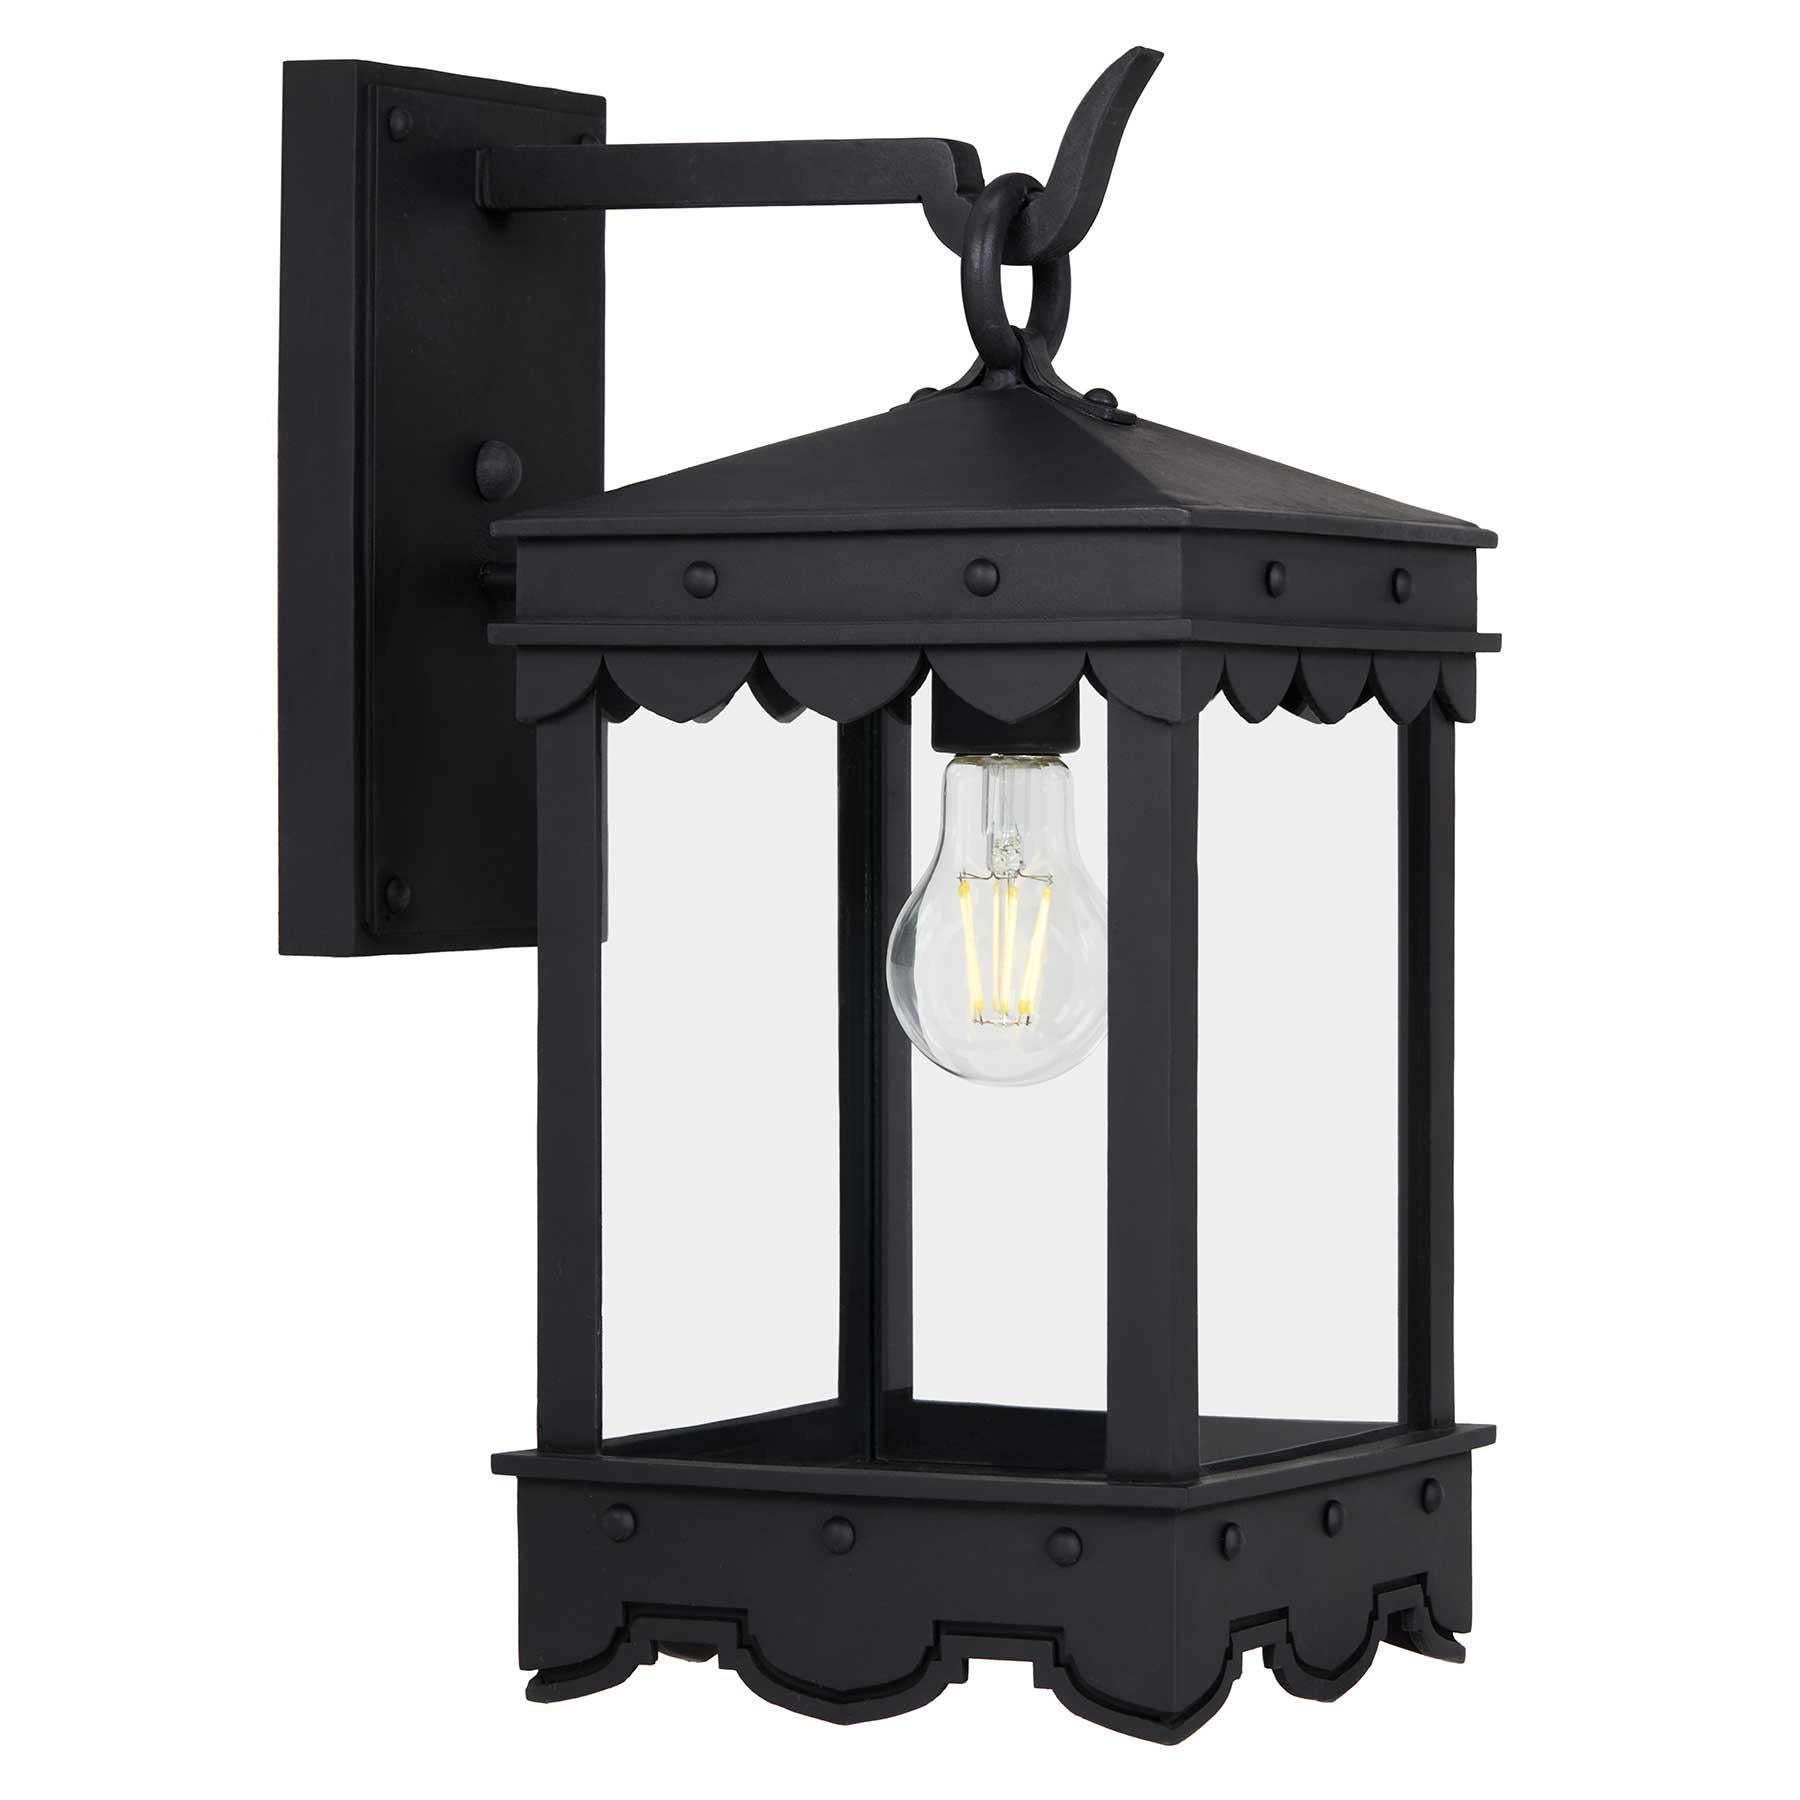 Spanish Colonial Contemporary Mediterranean Exterior Arm Mount Lantern, Old World, Antique Glass For Sale